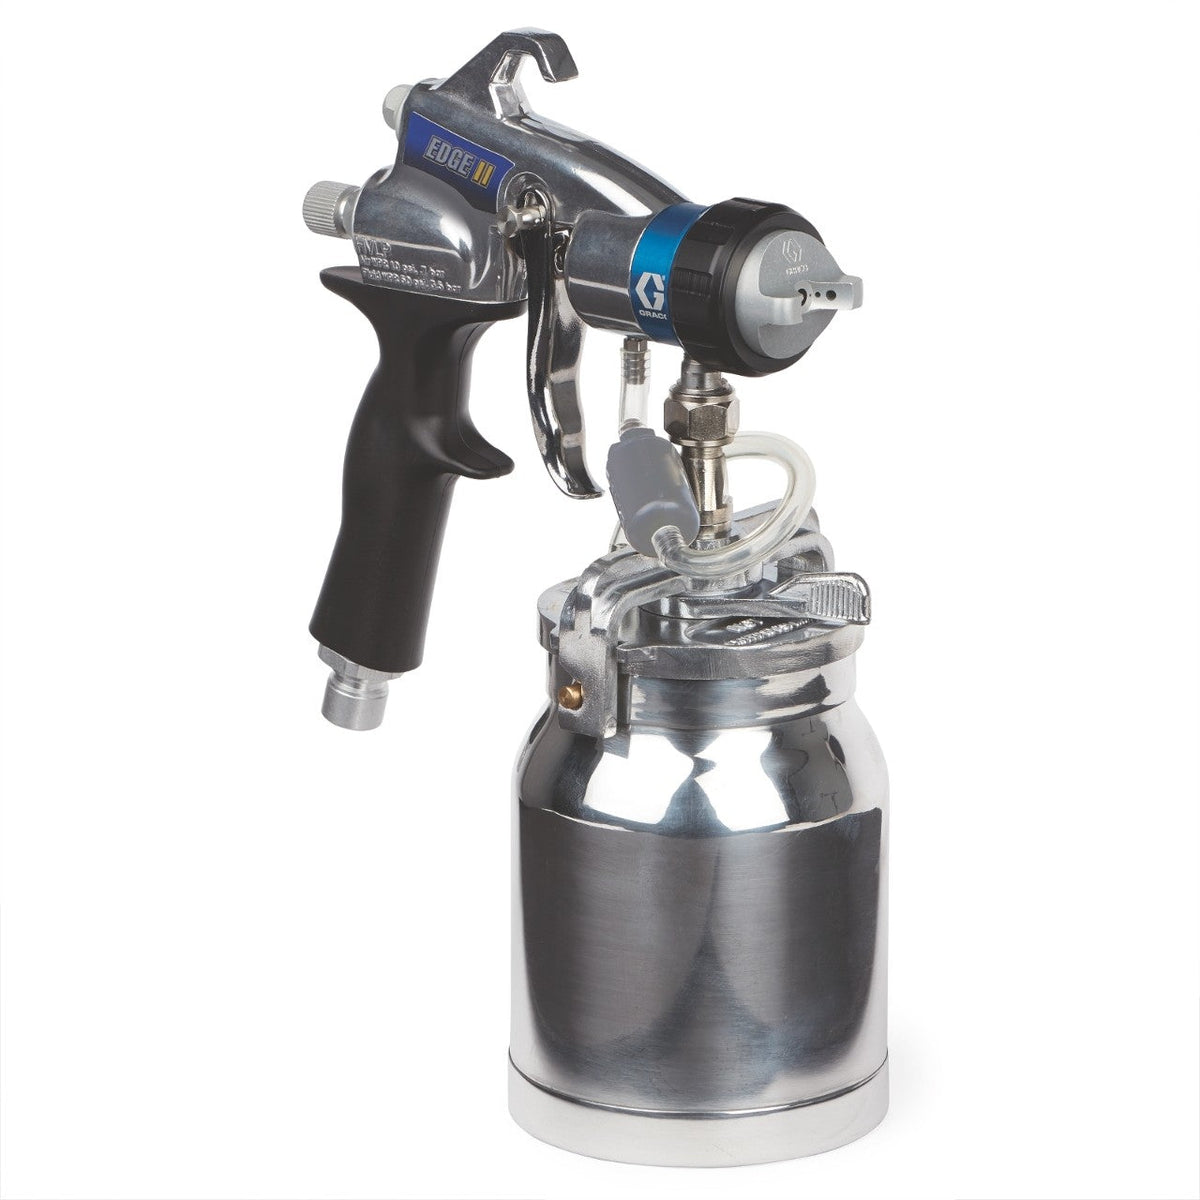 Graco EDGE II Gun with Metal Cup 17P653 - The Paint People